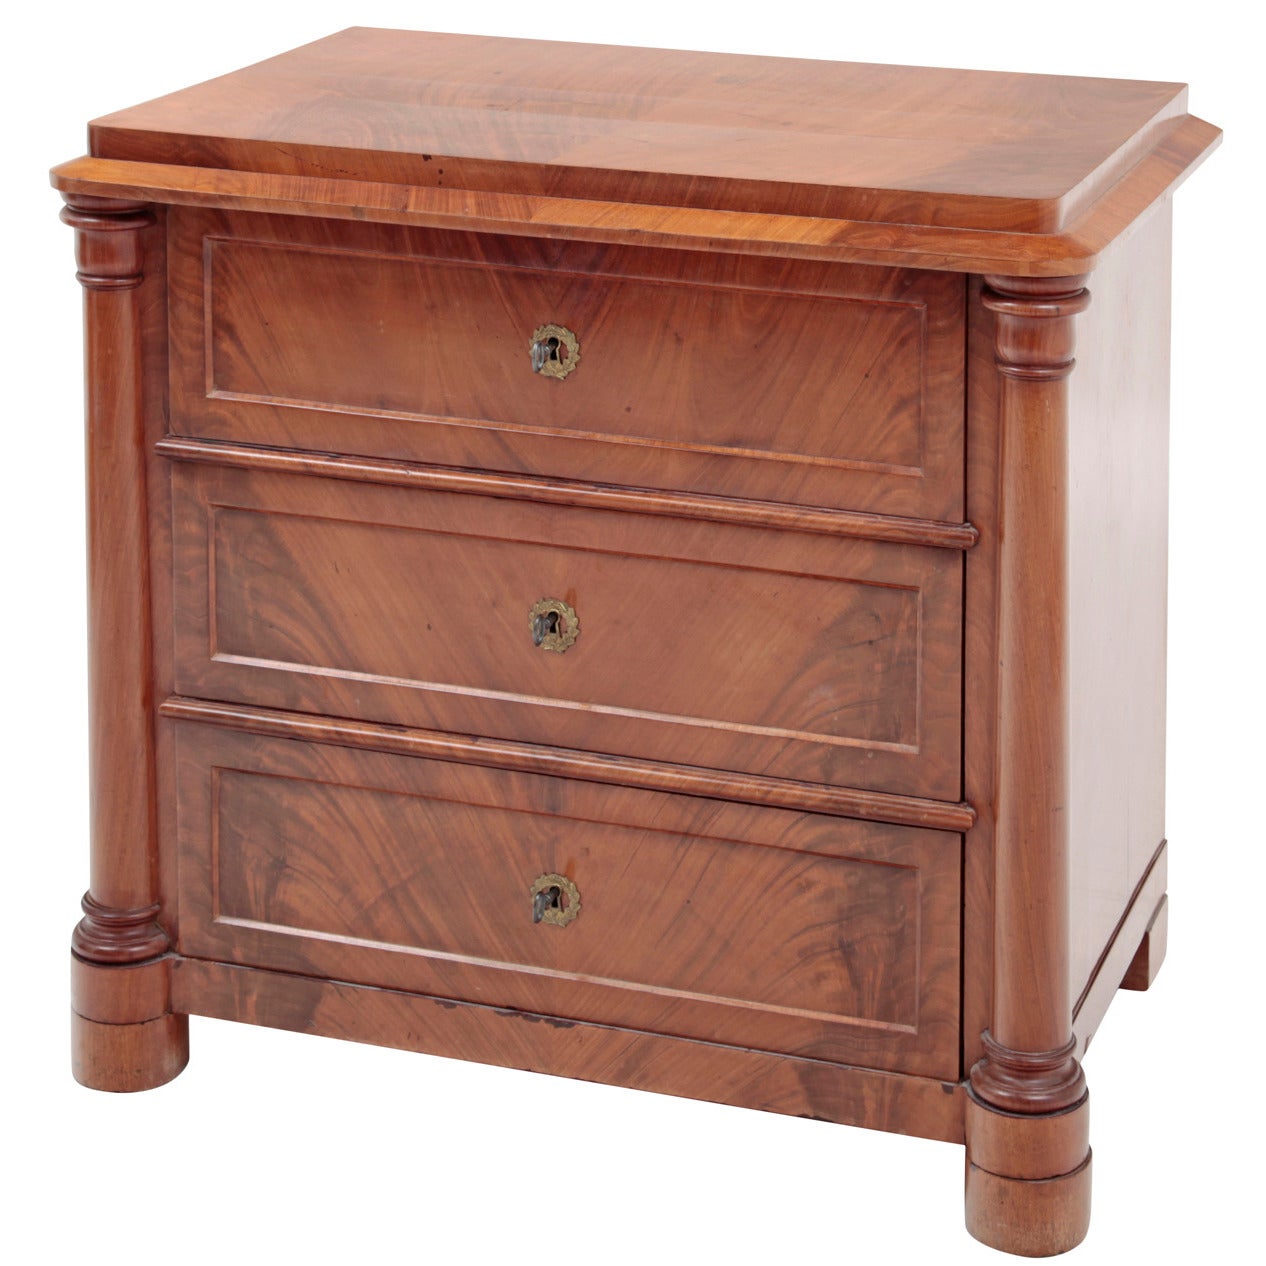 Biedermeier Chest of Drawers from 1820 / 1830.